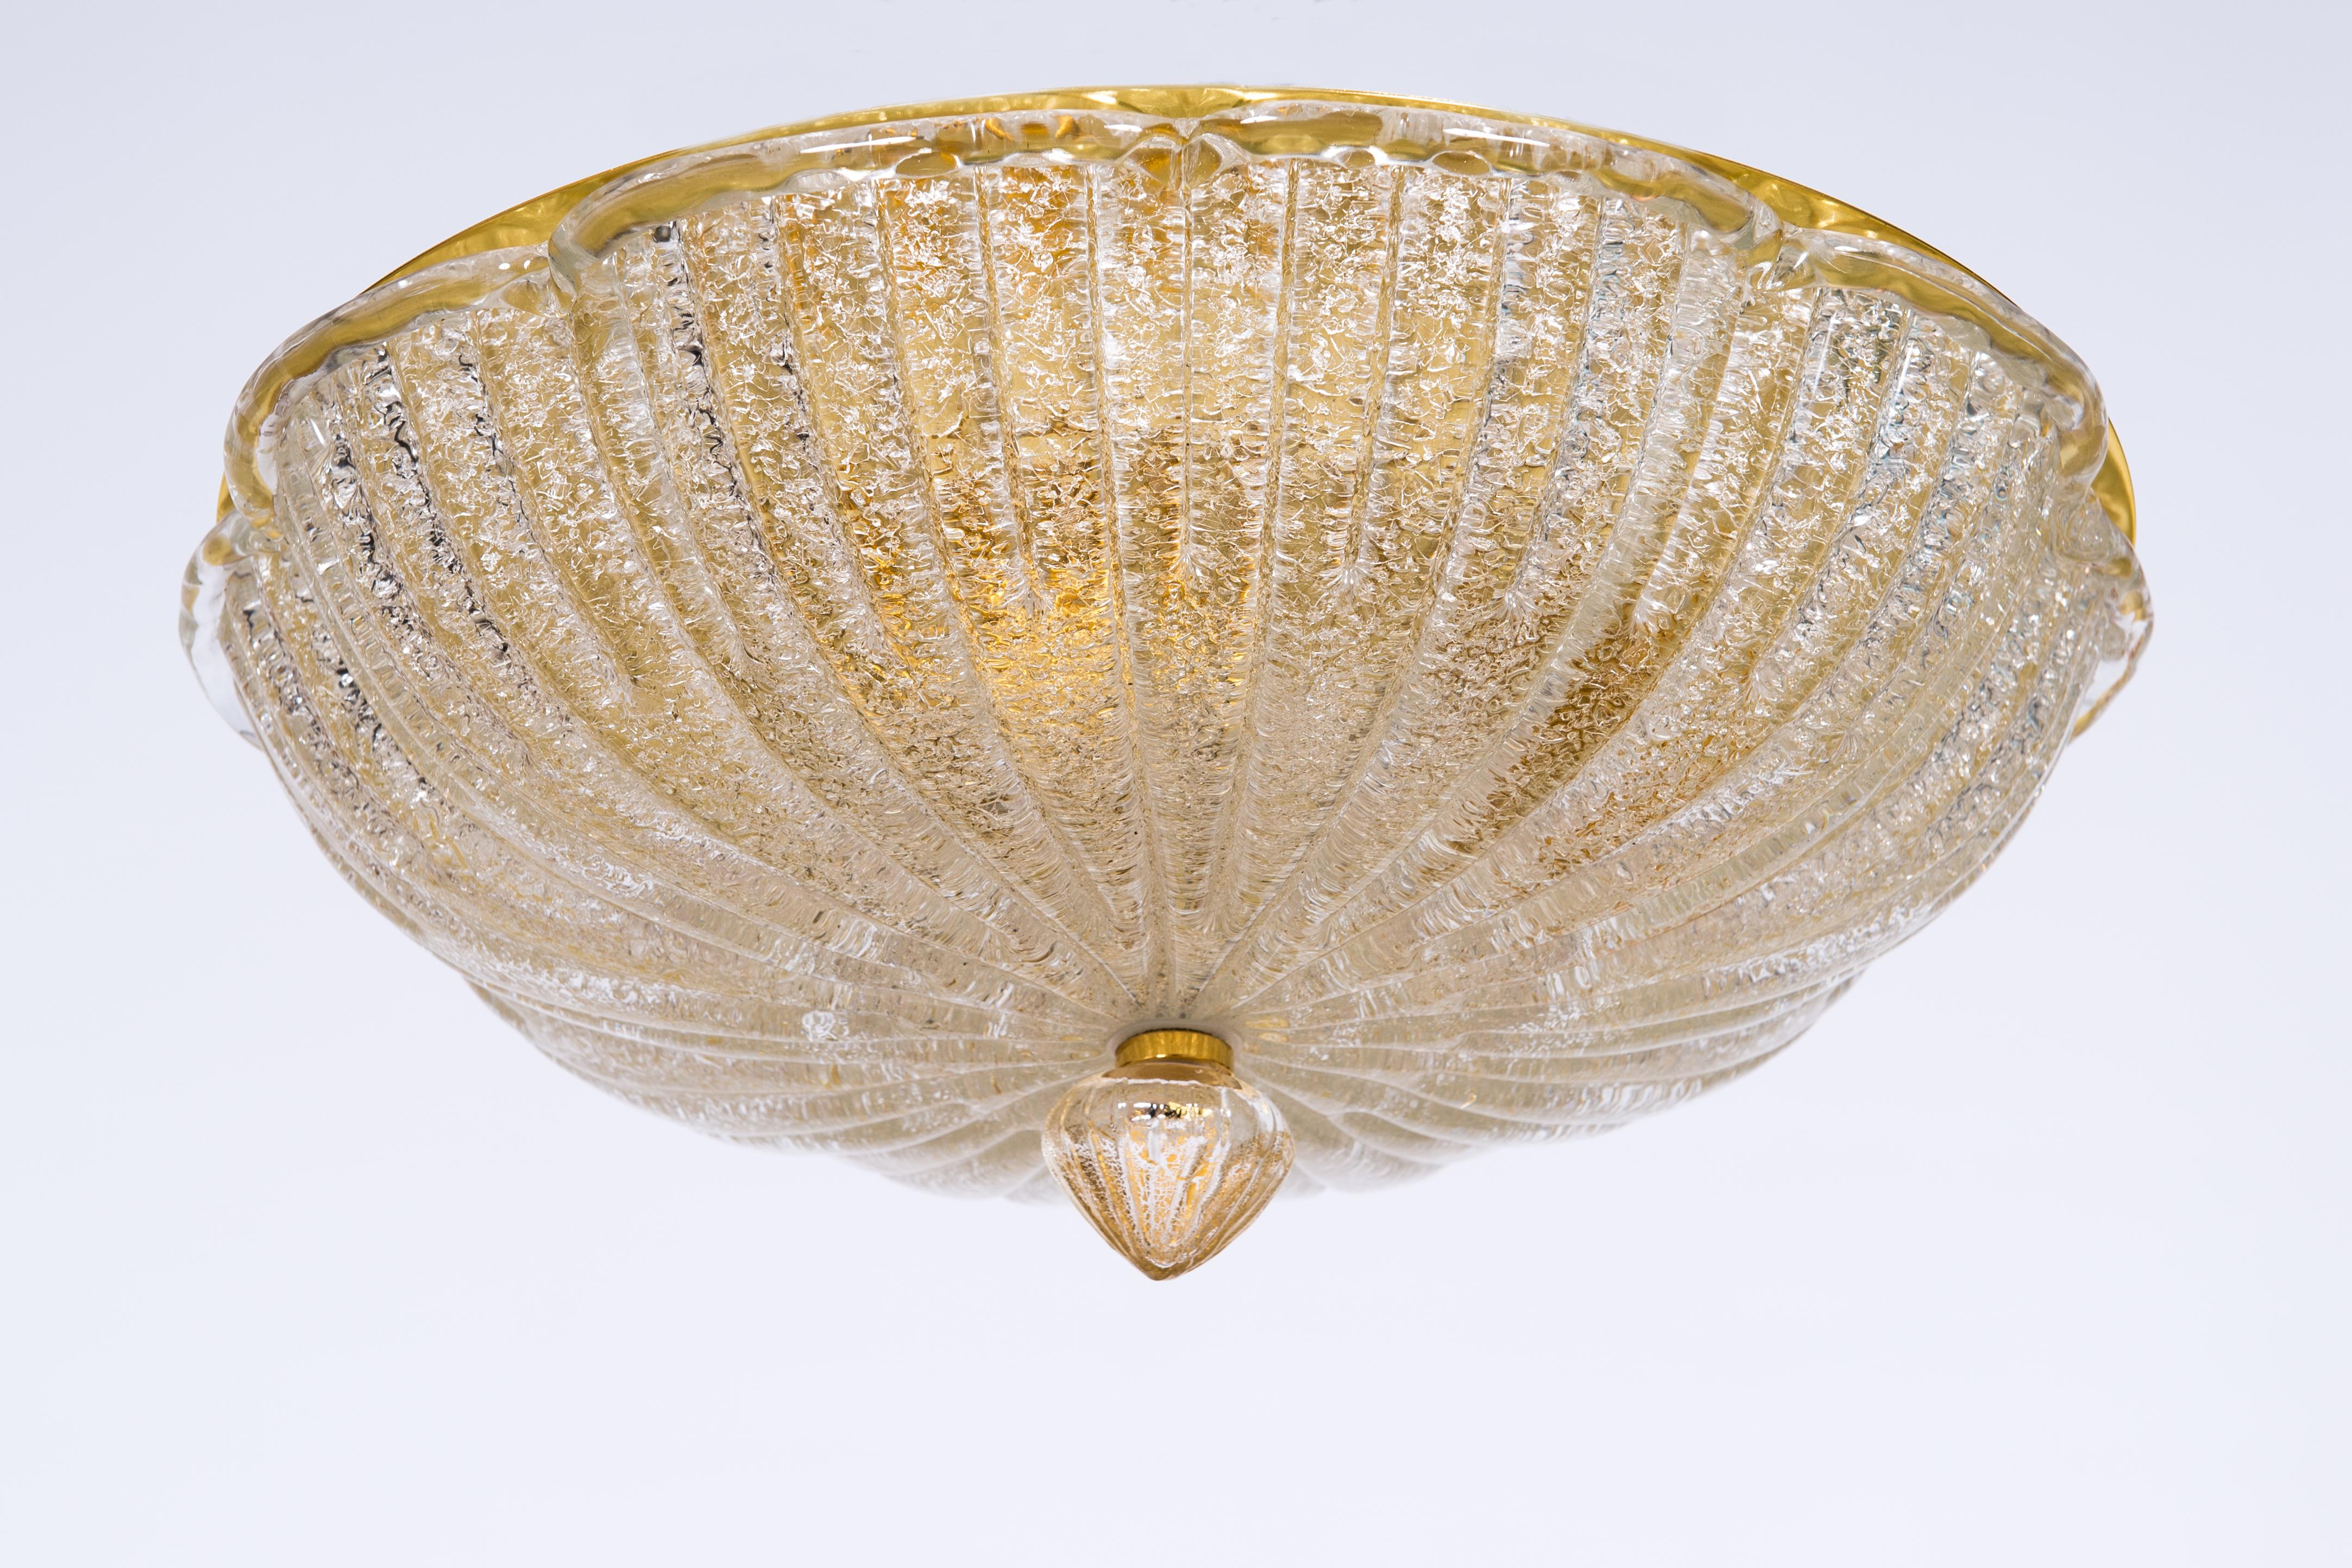 Venetian Grit Flush Mount in Blown Murano Glass Italy, with 6 Lights, made in the 1980s.
This refined Flush Mount stands out for the quality of its material and the perfection of its details. It was entirely handcrafted in the Venetian island of